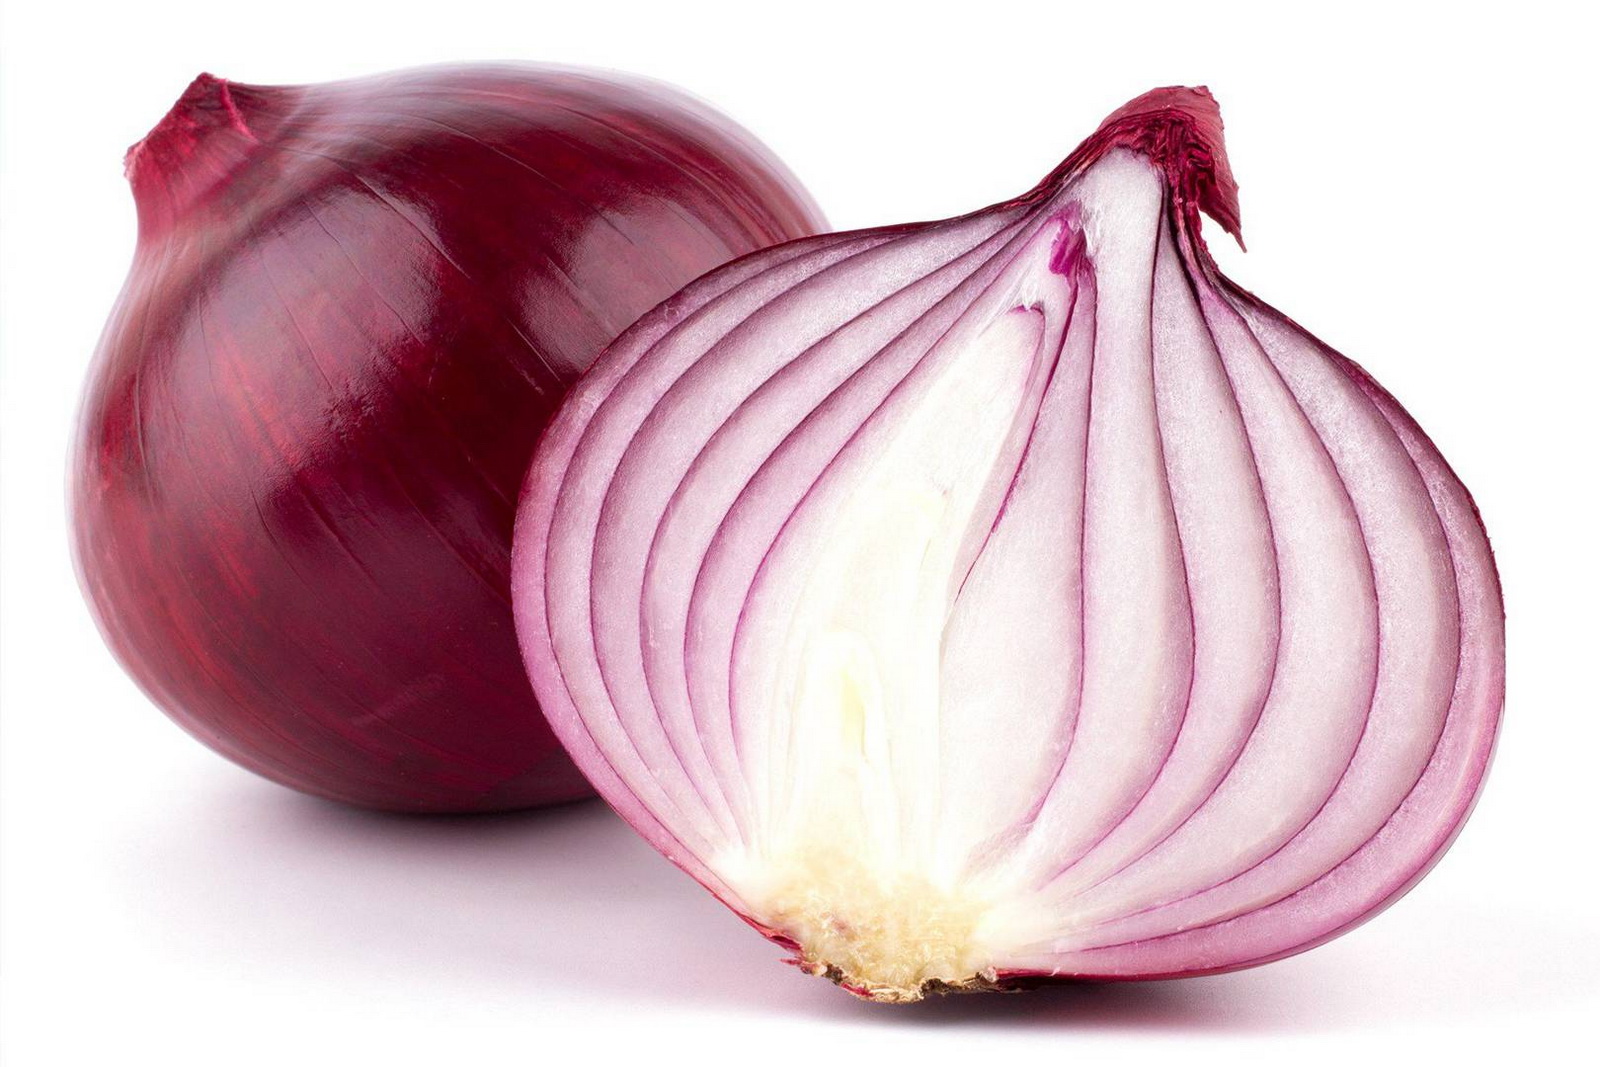 Tor Onion Search